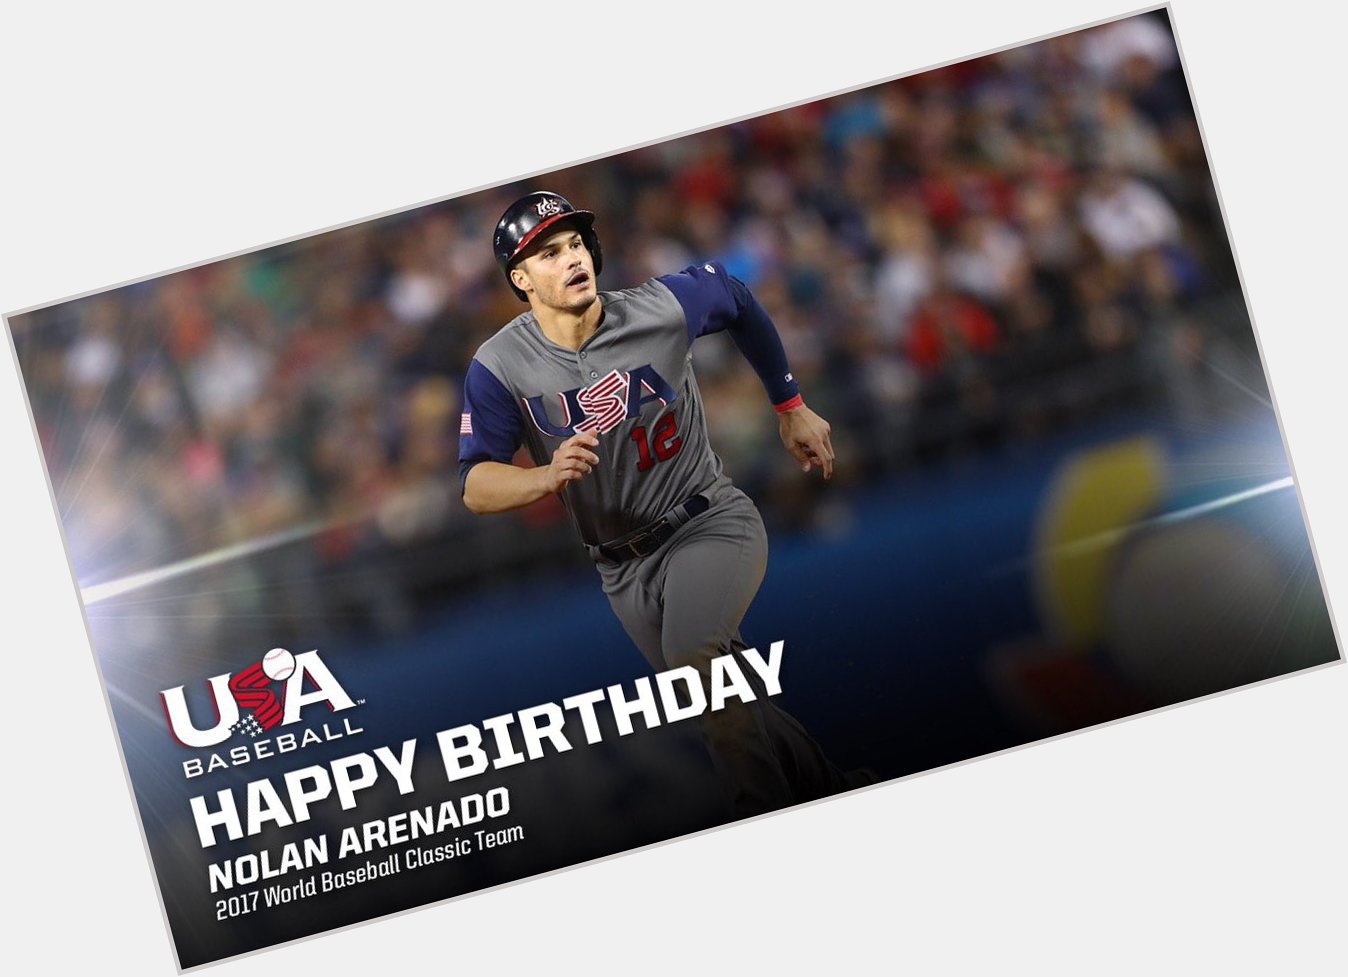 How \bout a for an early birthday present? 

Happy birthday to World Champion, Nolan Arenado! 